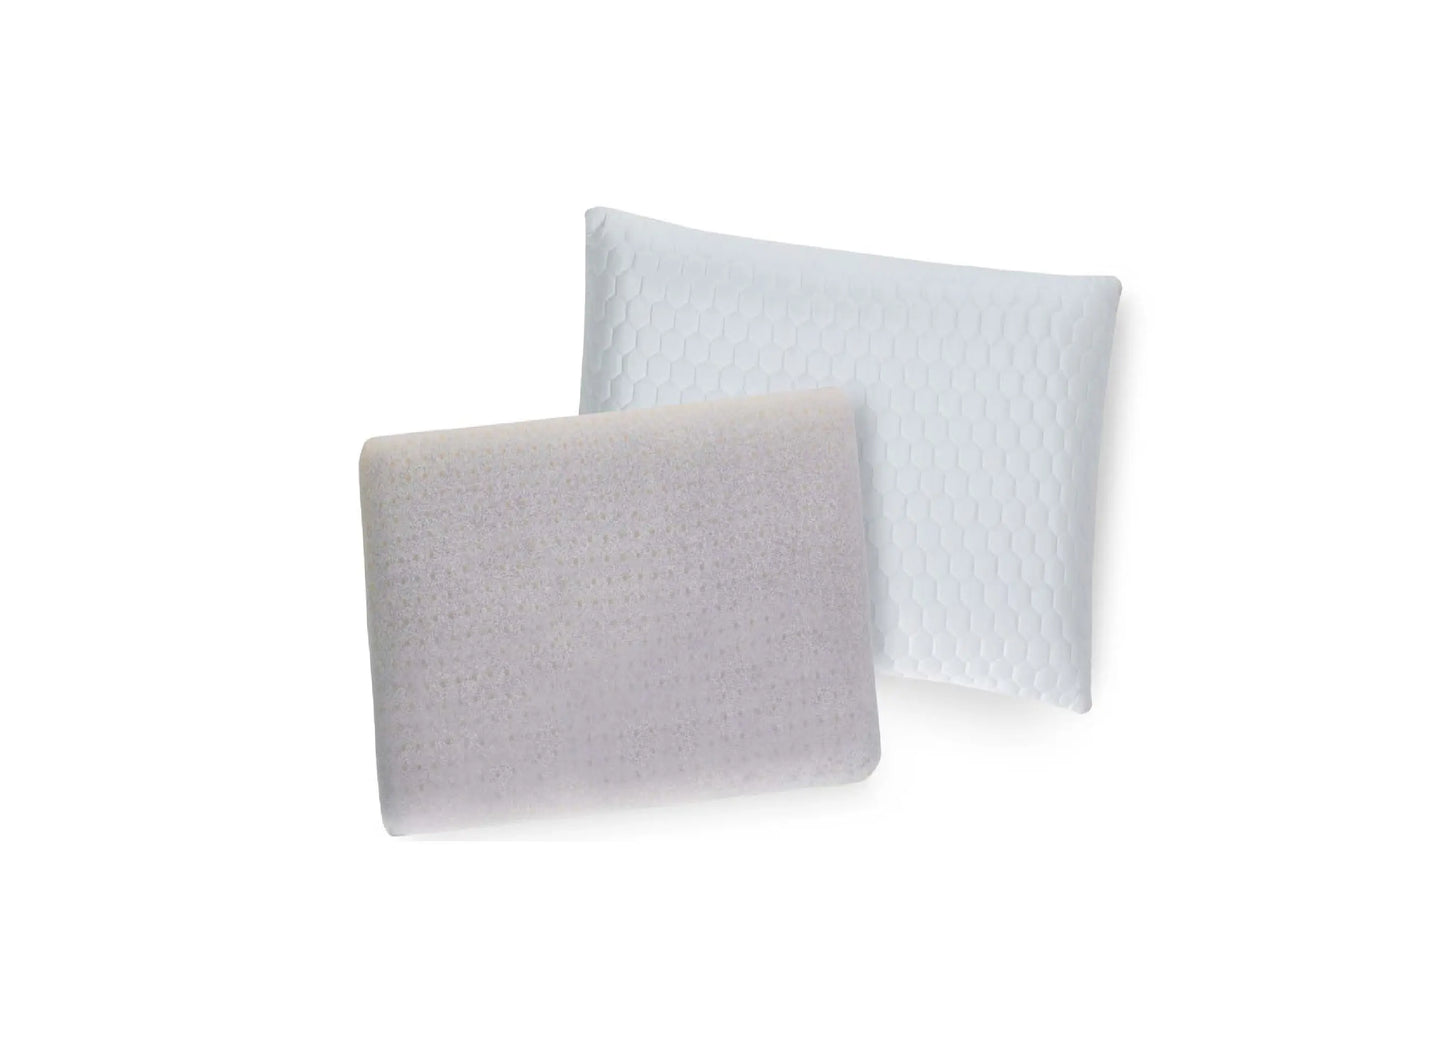 High Profile Cooling Memory Foam Pillow house brand private label